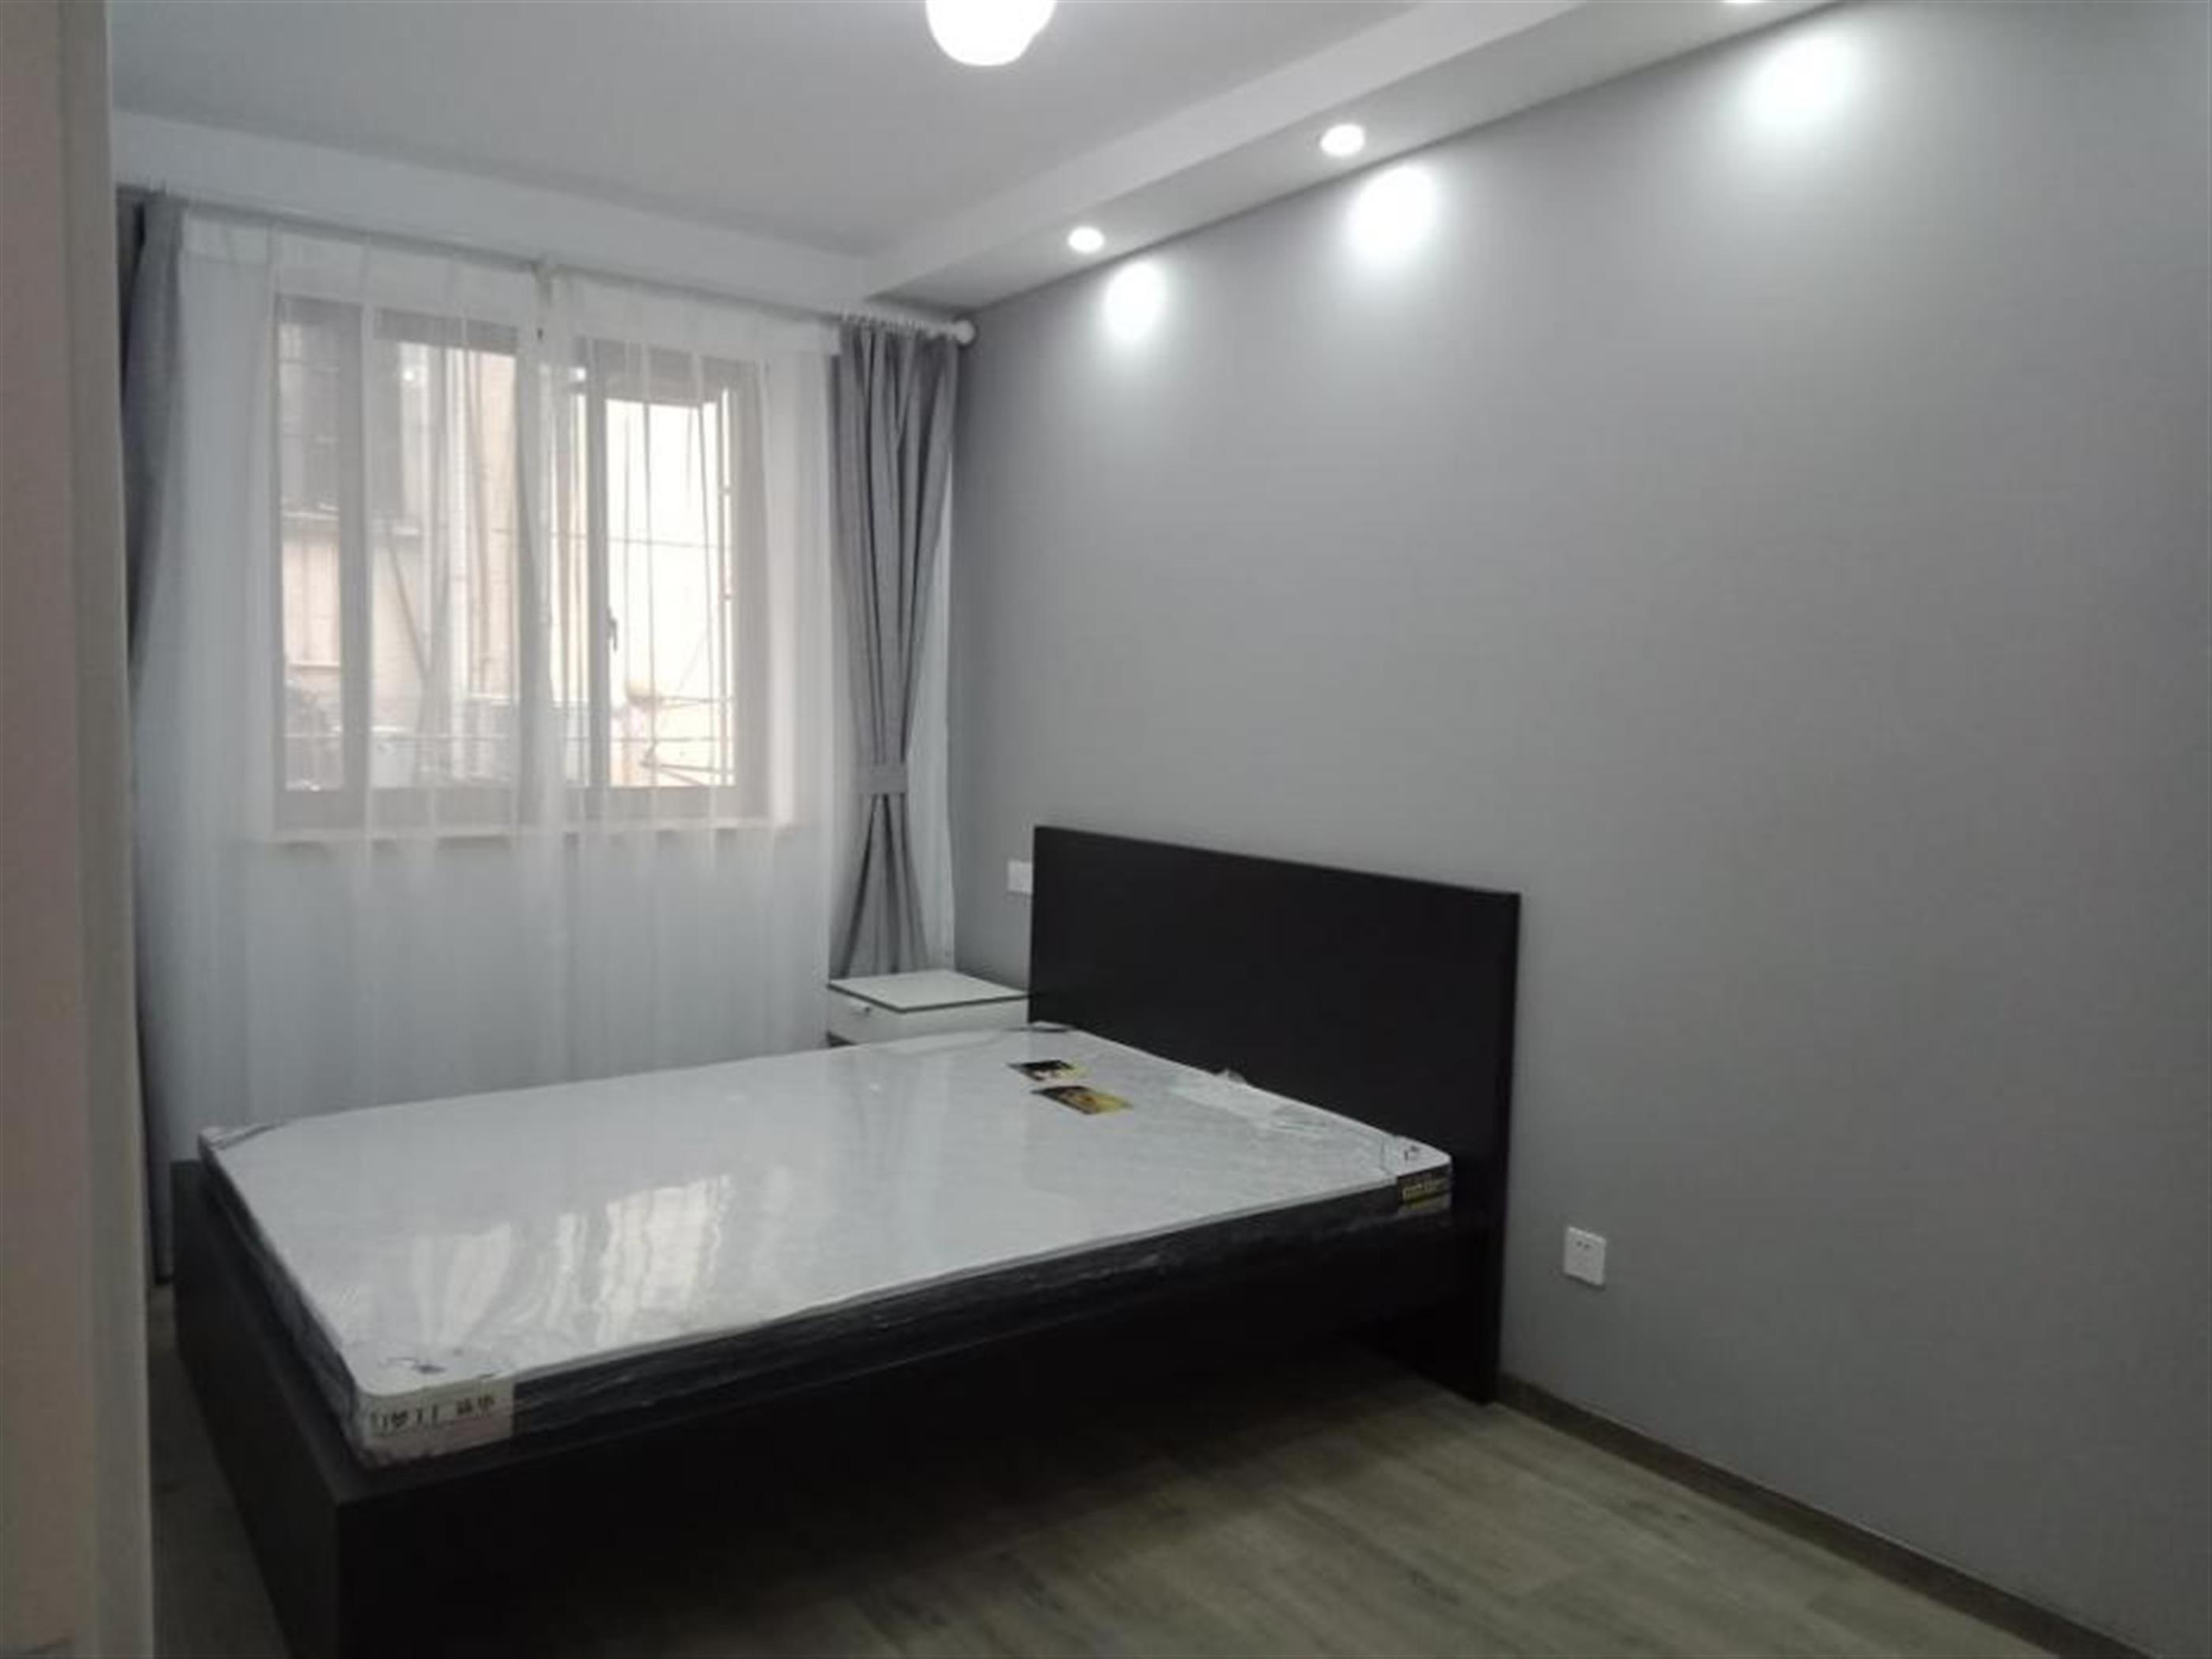 New Bed Renovated Cozy Budget 1BR Apt nr Jiangsu Rd LN2/11 for Rent in Shanghai